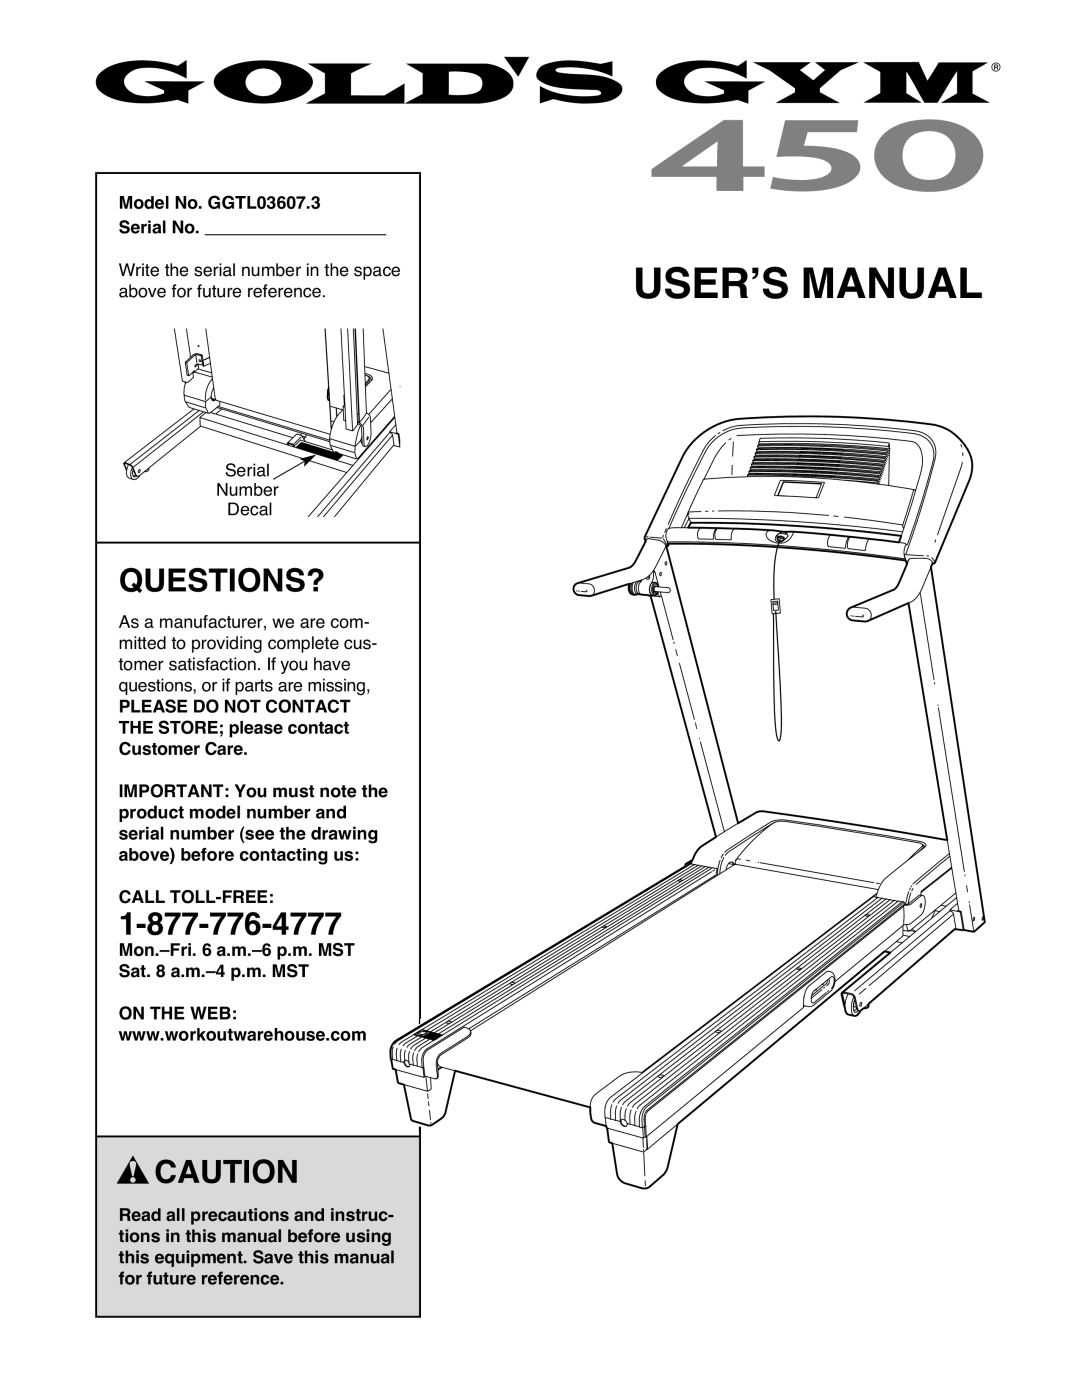 Gold's Gym GGTL03607.3 manual Questions?, 1CALL-877TOLL-776-FREE-4777, Serial No.USERʼS MANUAL 